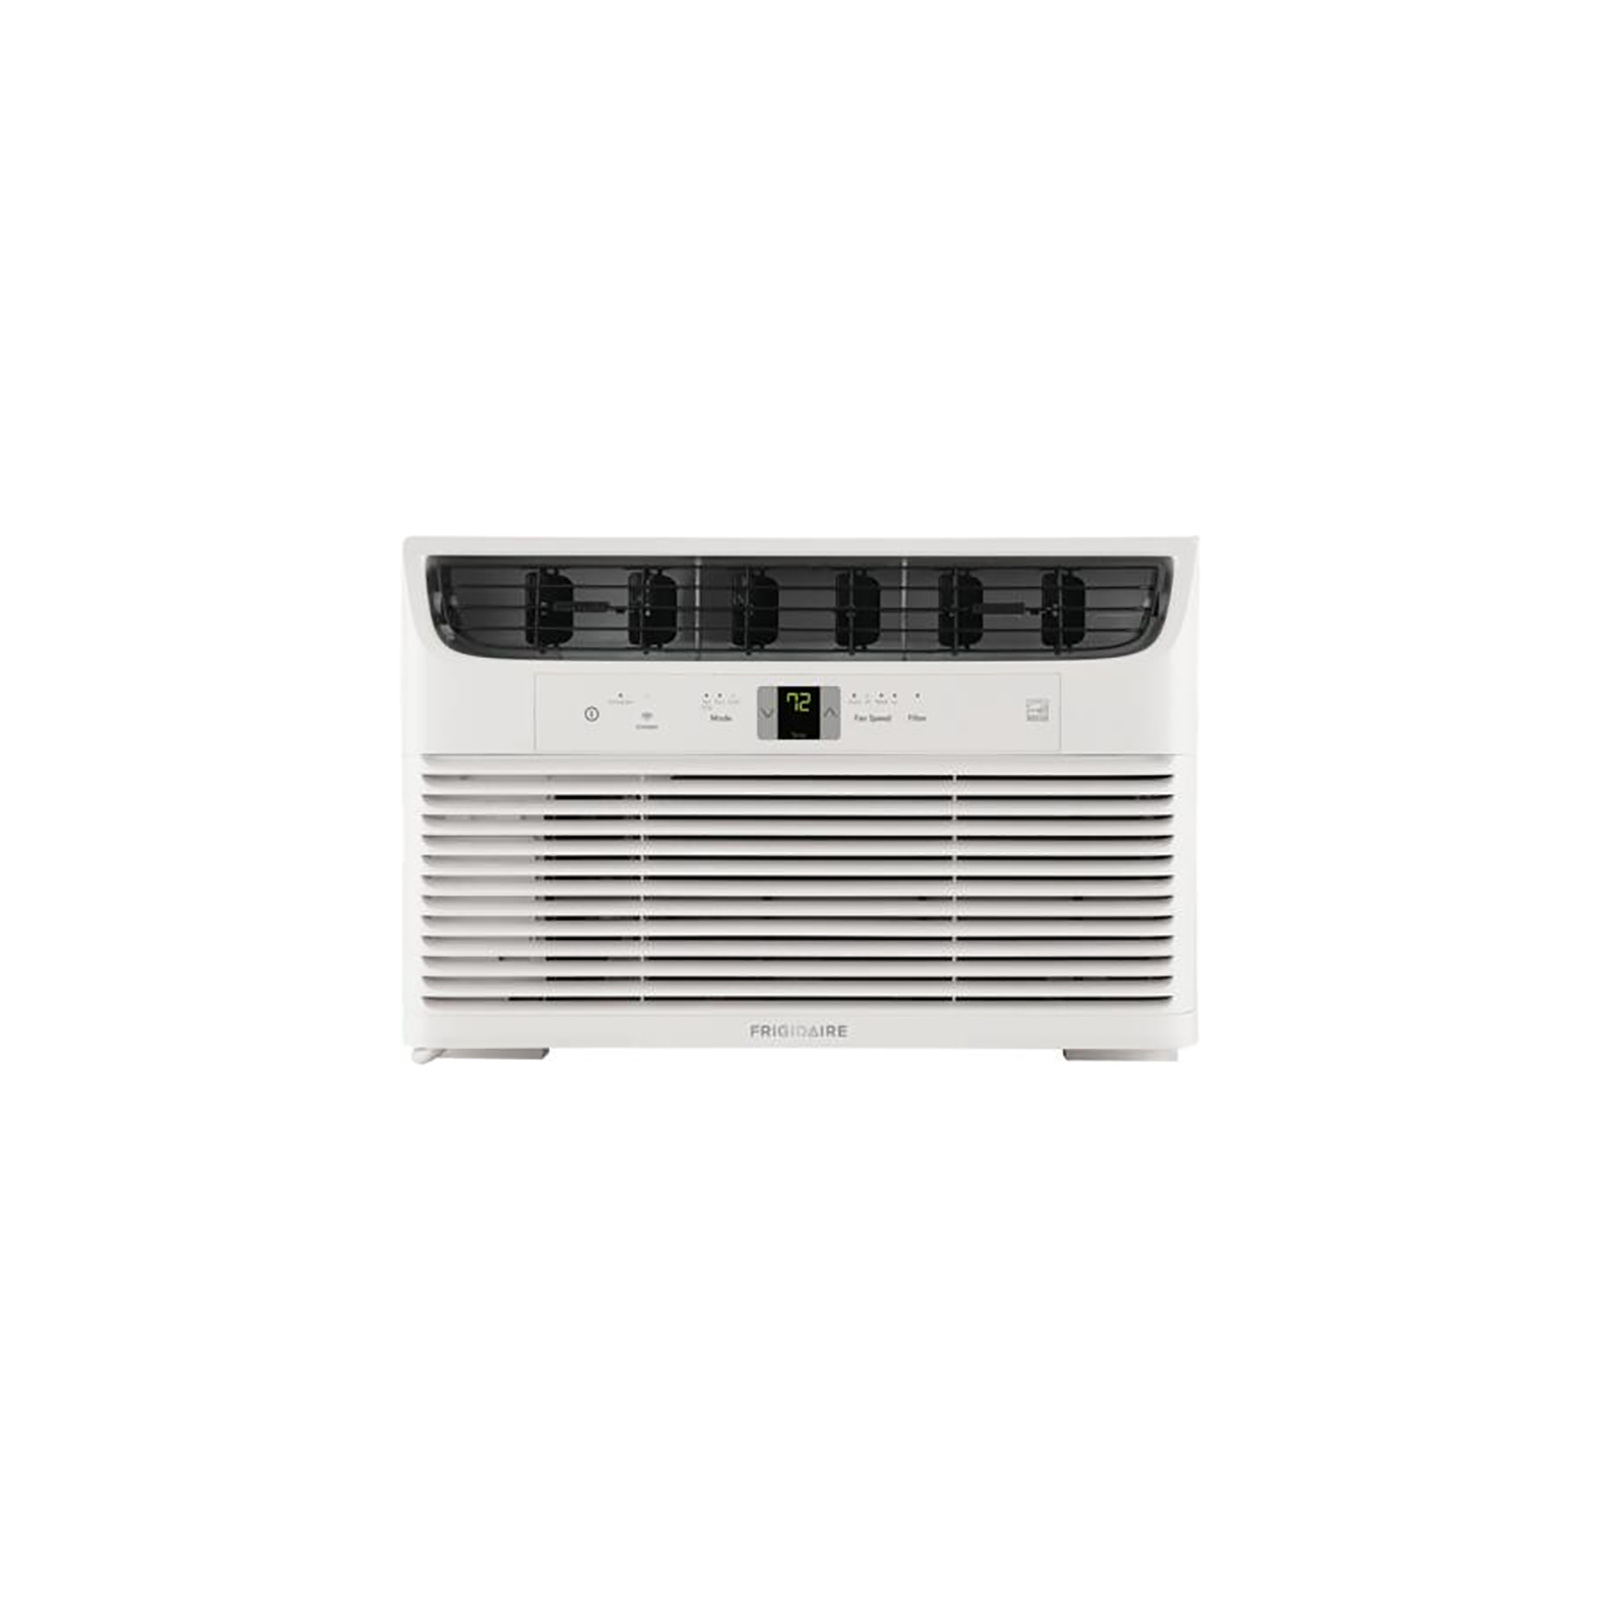 Frigidaire FHWW083WB1 19" Window Mounted Smart Air Conditioner - White